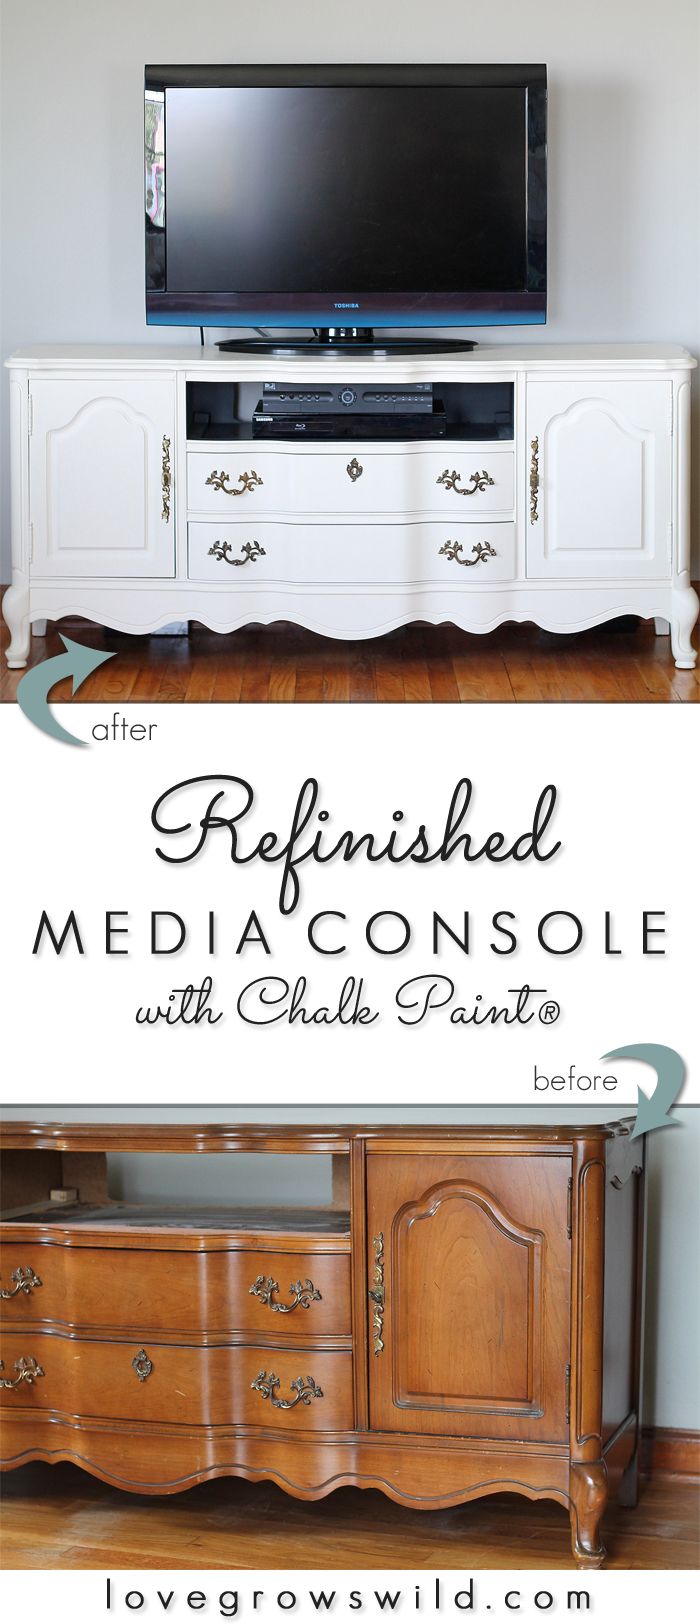 A media console gets a BIG Chalk Paint makeover! Come see the transformation ste...